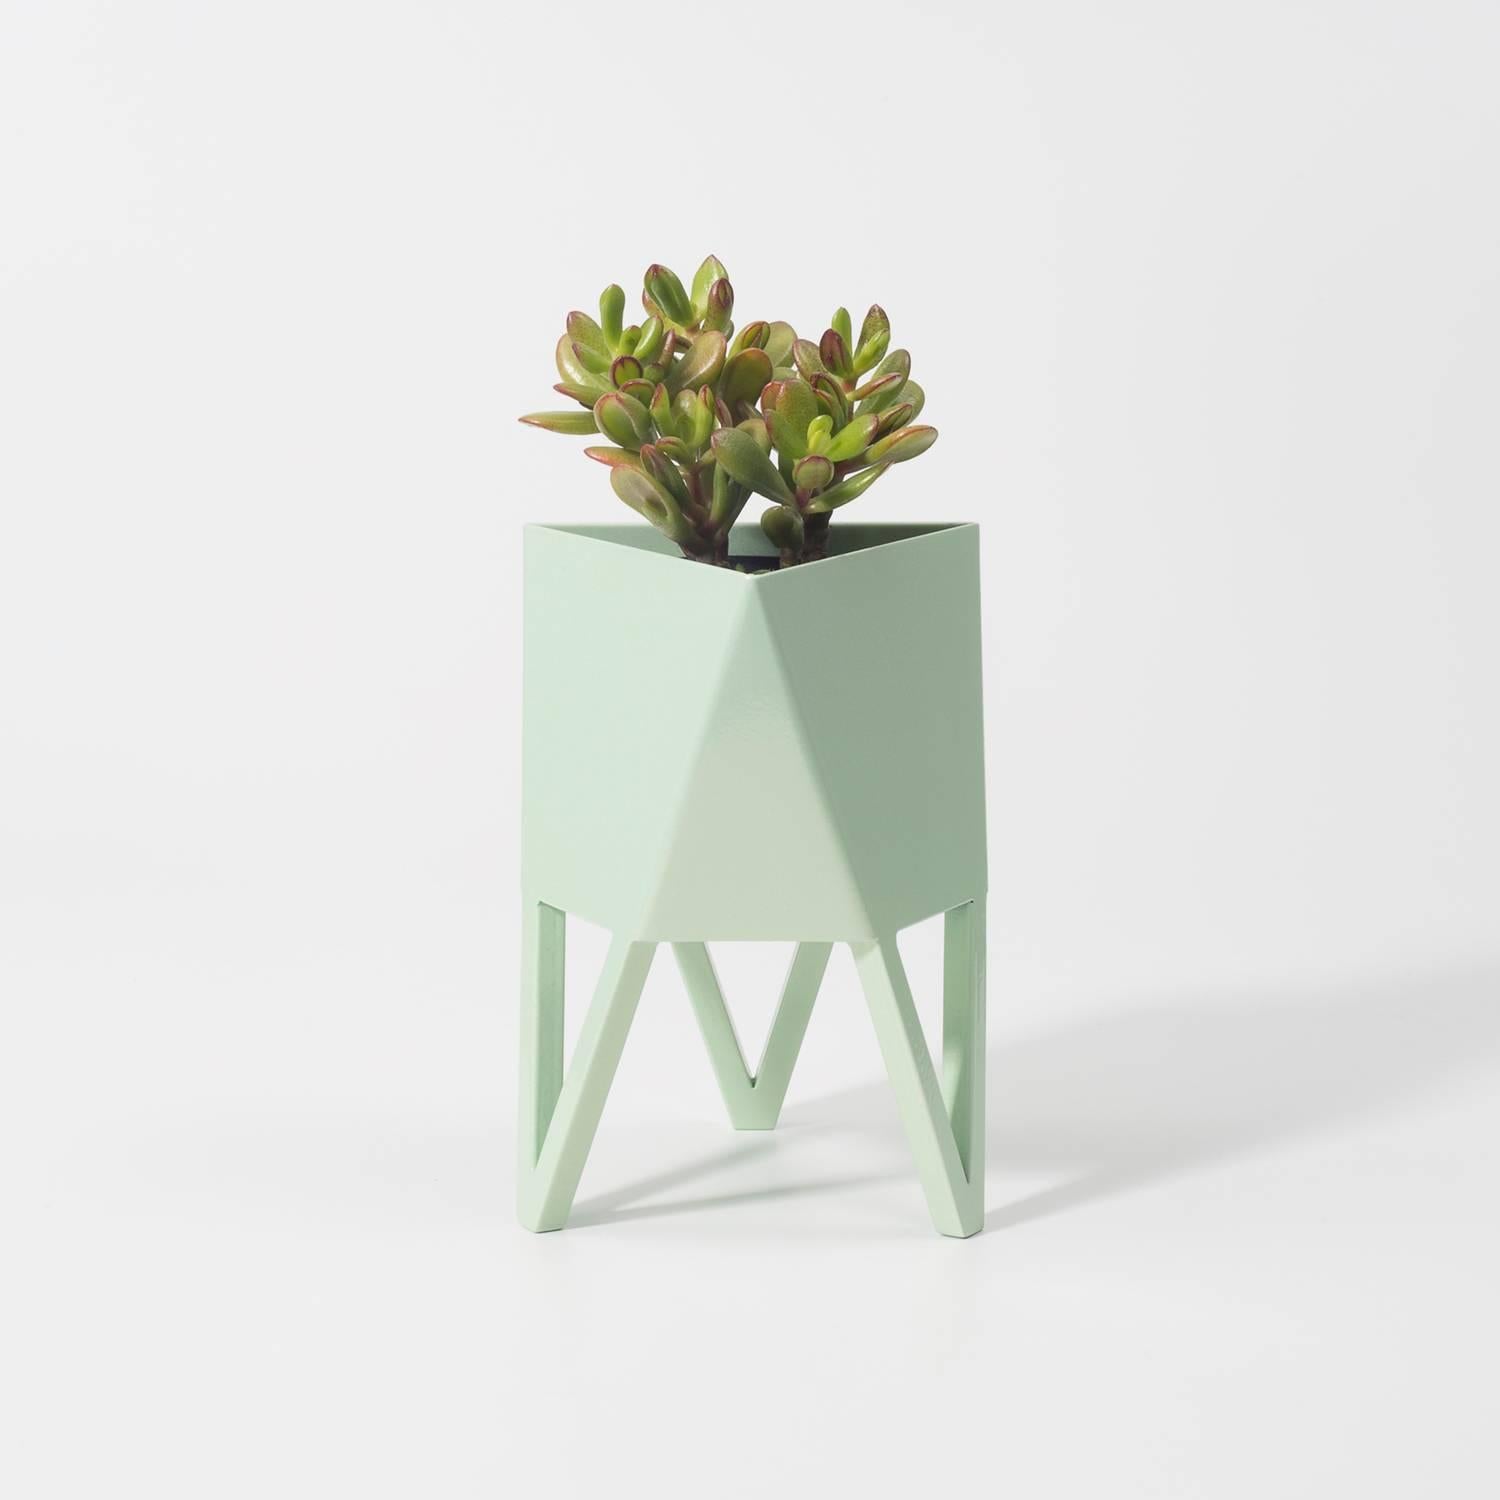 Deca Planter in Light Pink Steel, Medium, by Force/Collide 5